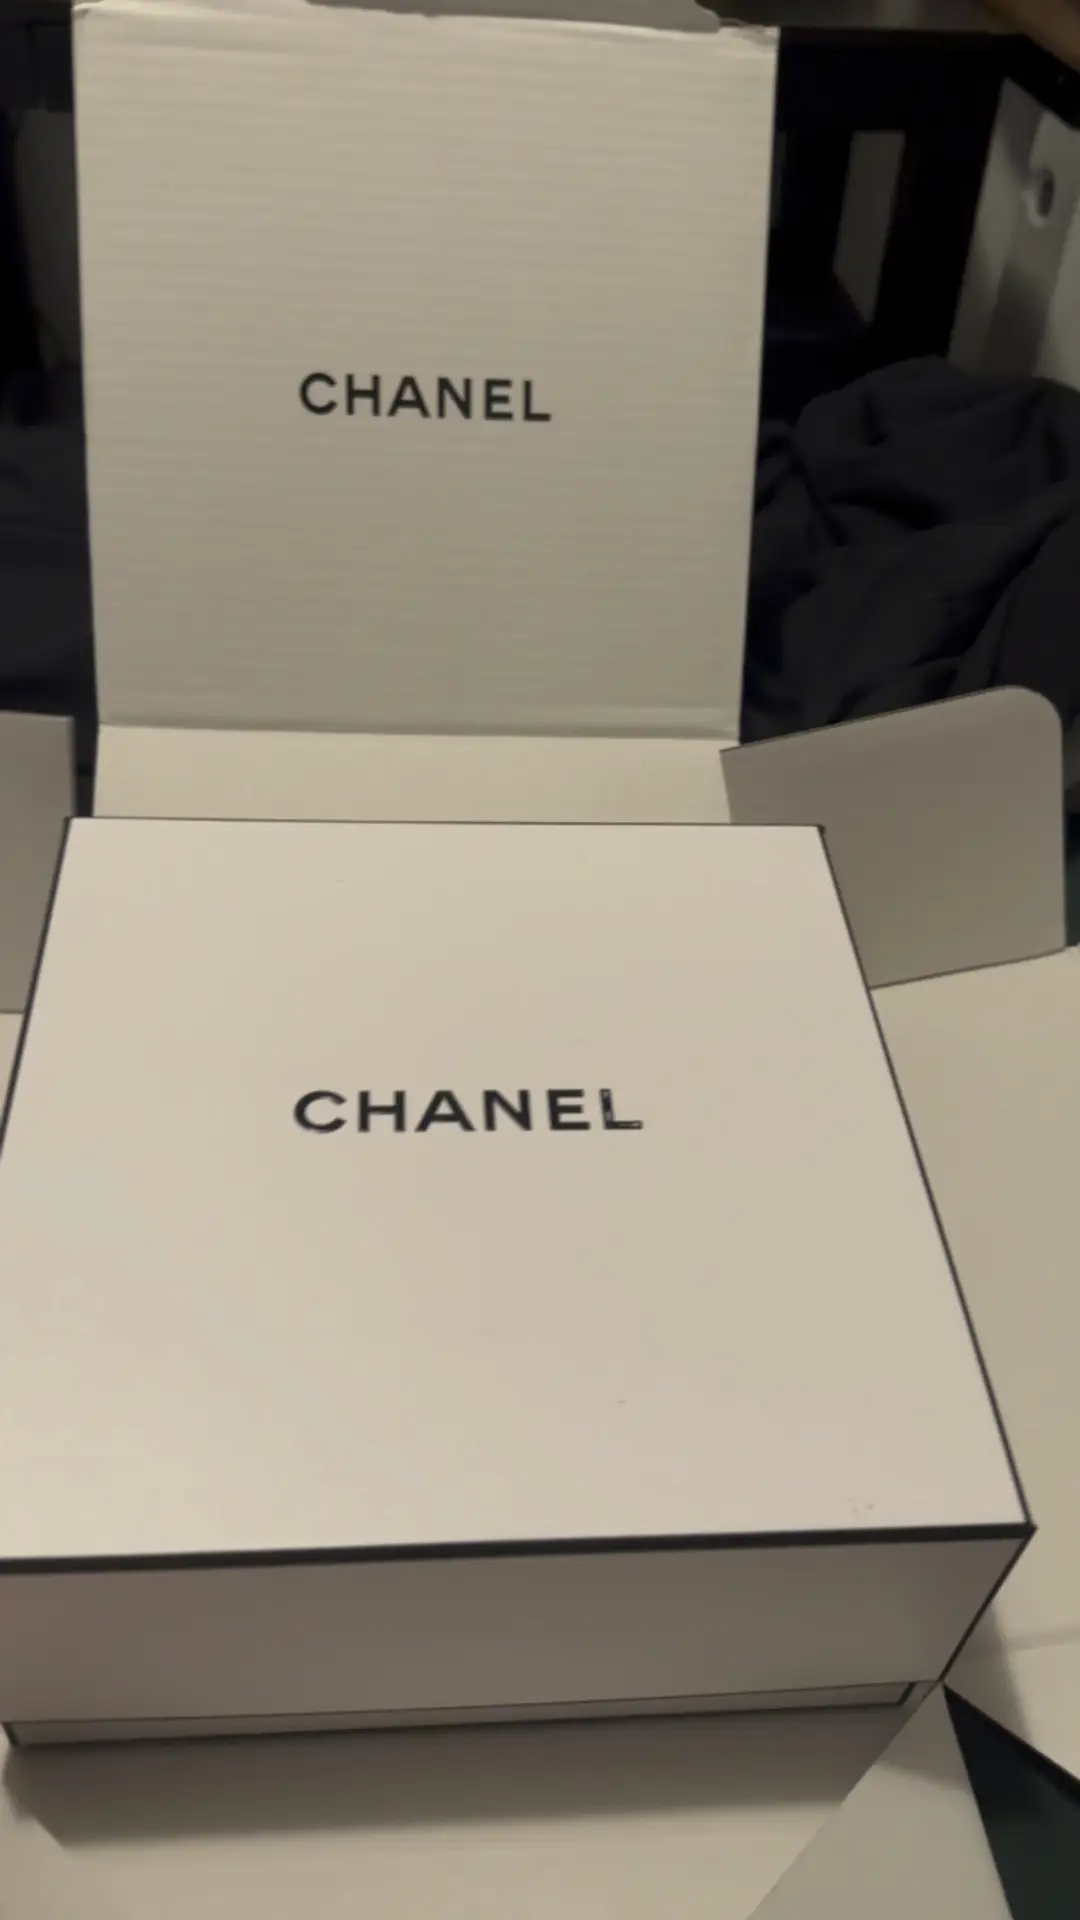 Cheapest thing in Chanel? Could it be. #cheapdesigner